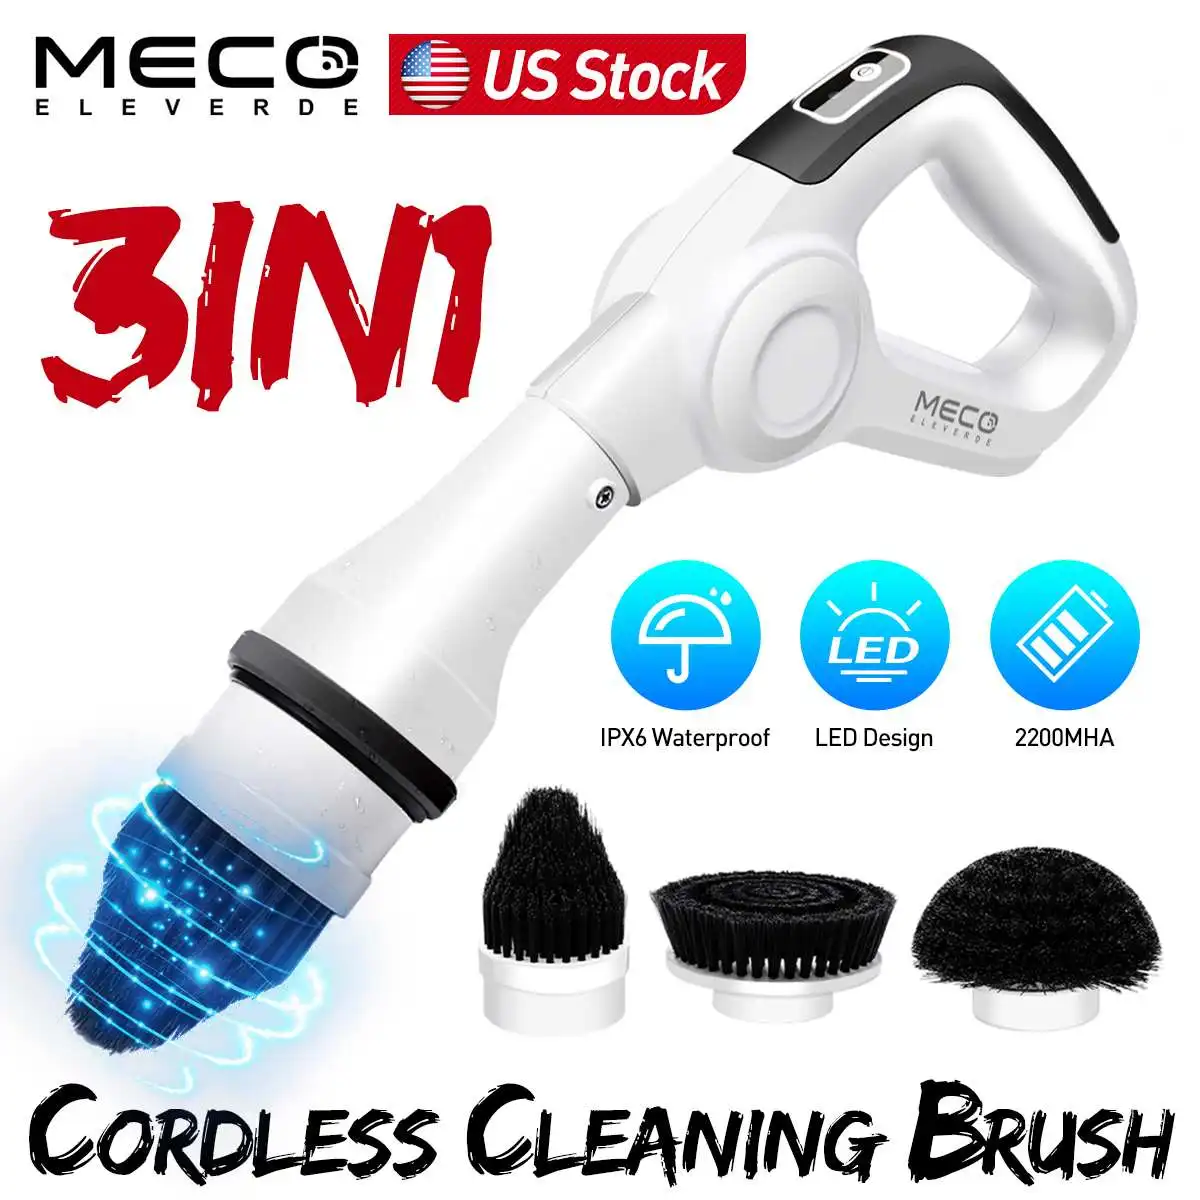 

MECO Electric Cordless Spin Brush High Power Tub Scrubber Rotation Cleaning Tools for Bathtub with 3 Replaceable Brush Heads US